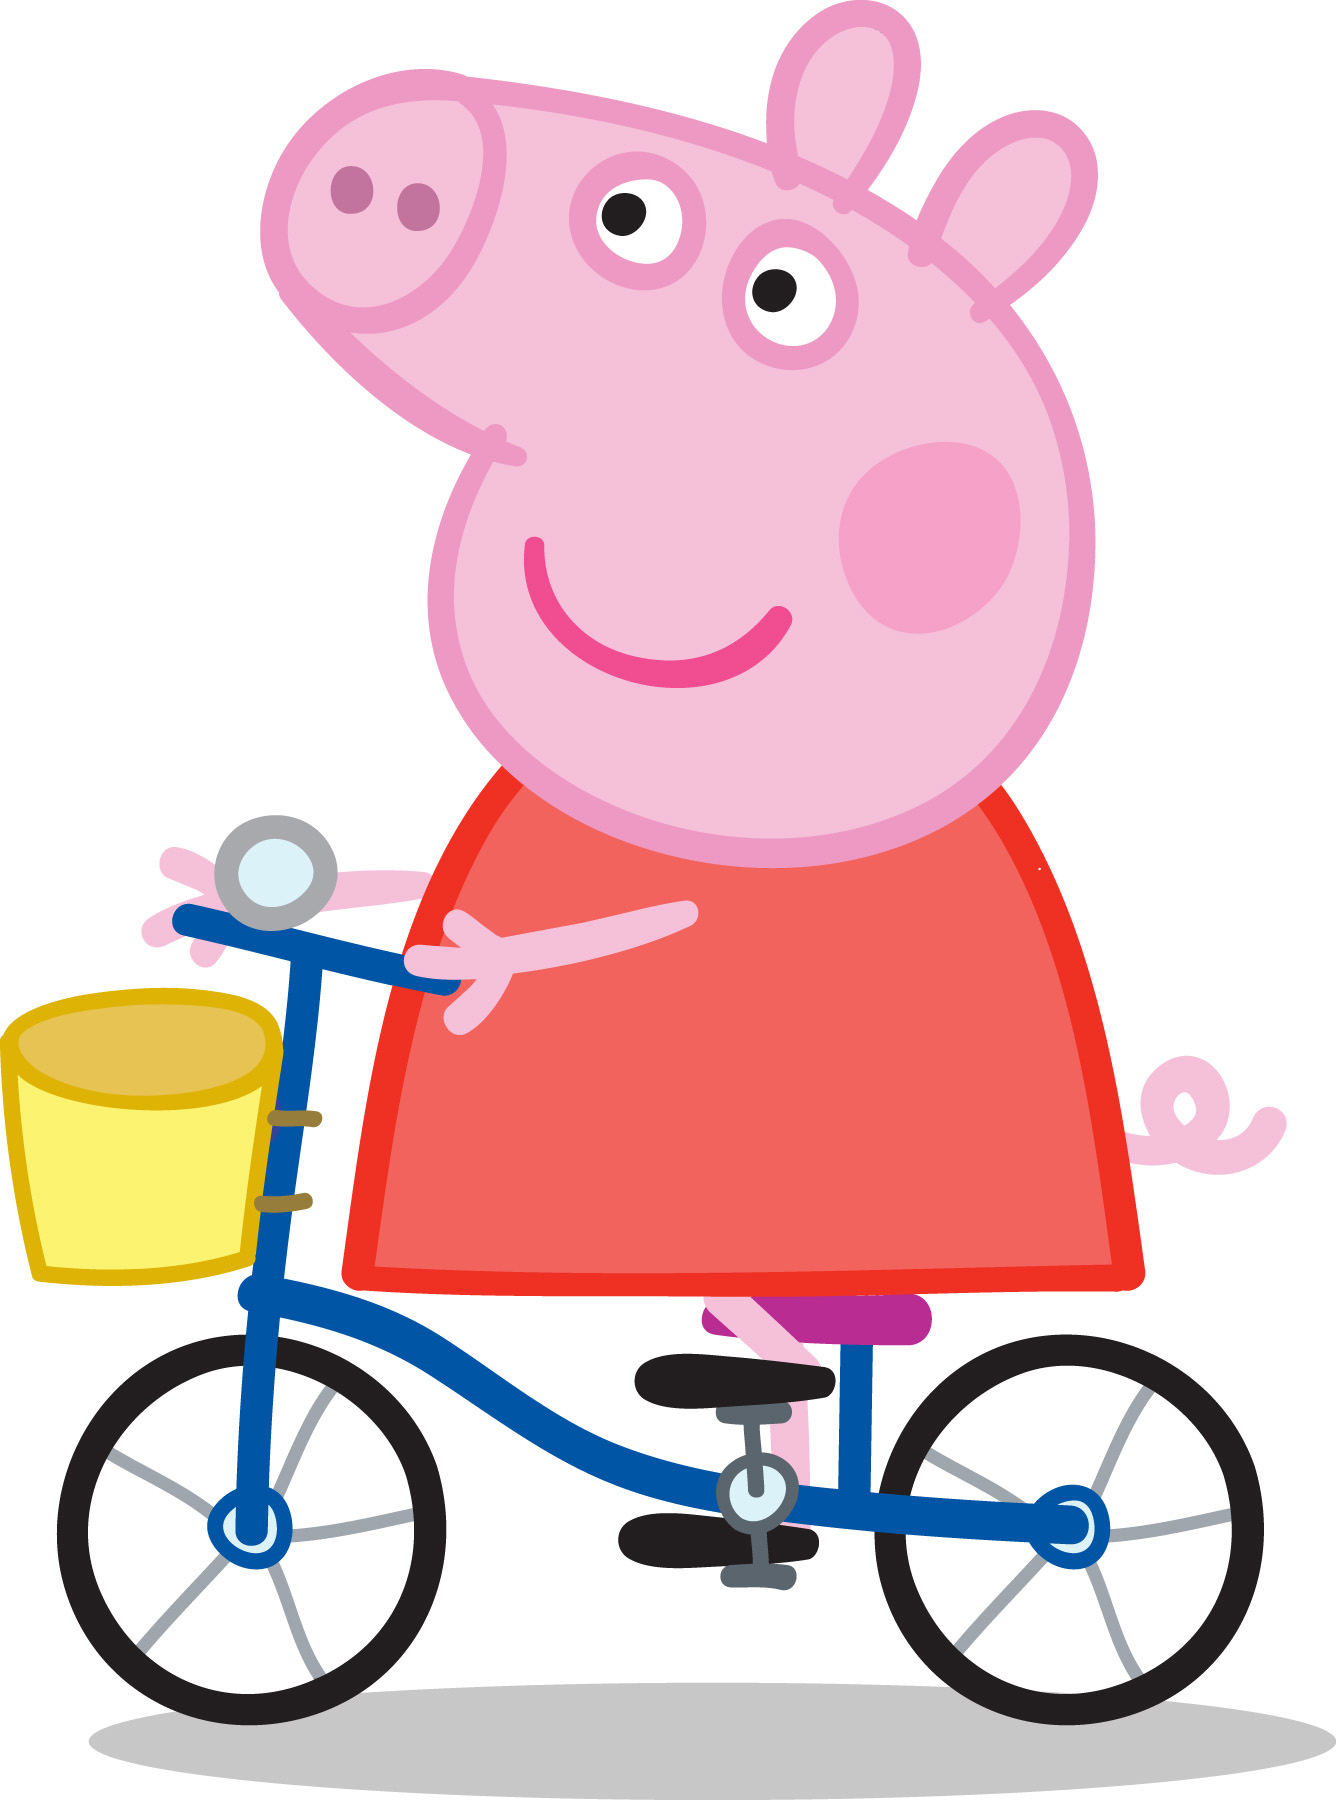 Peppa Pig rides her bicyle in a scene from one of the "Tickle U" series of cartoons.